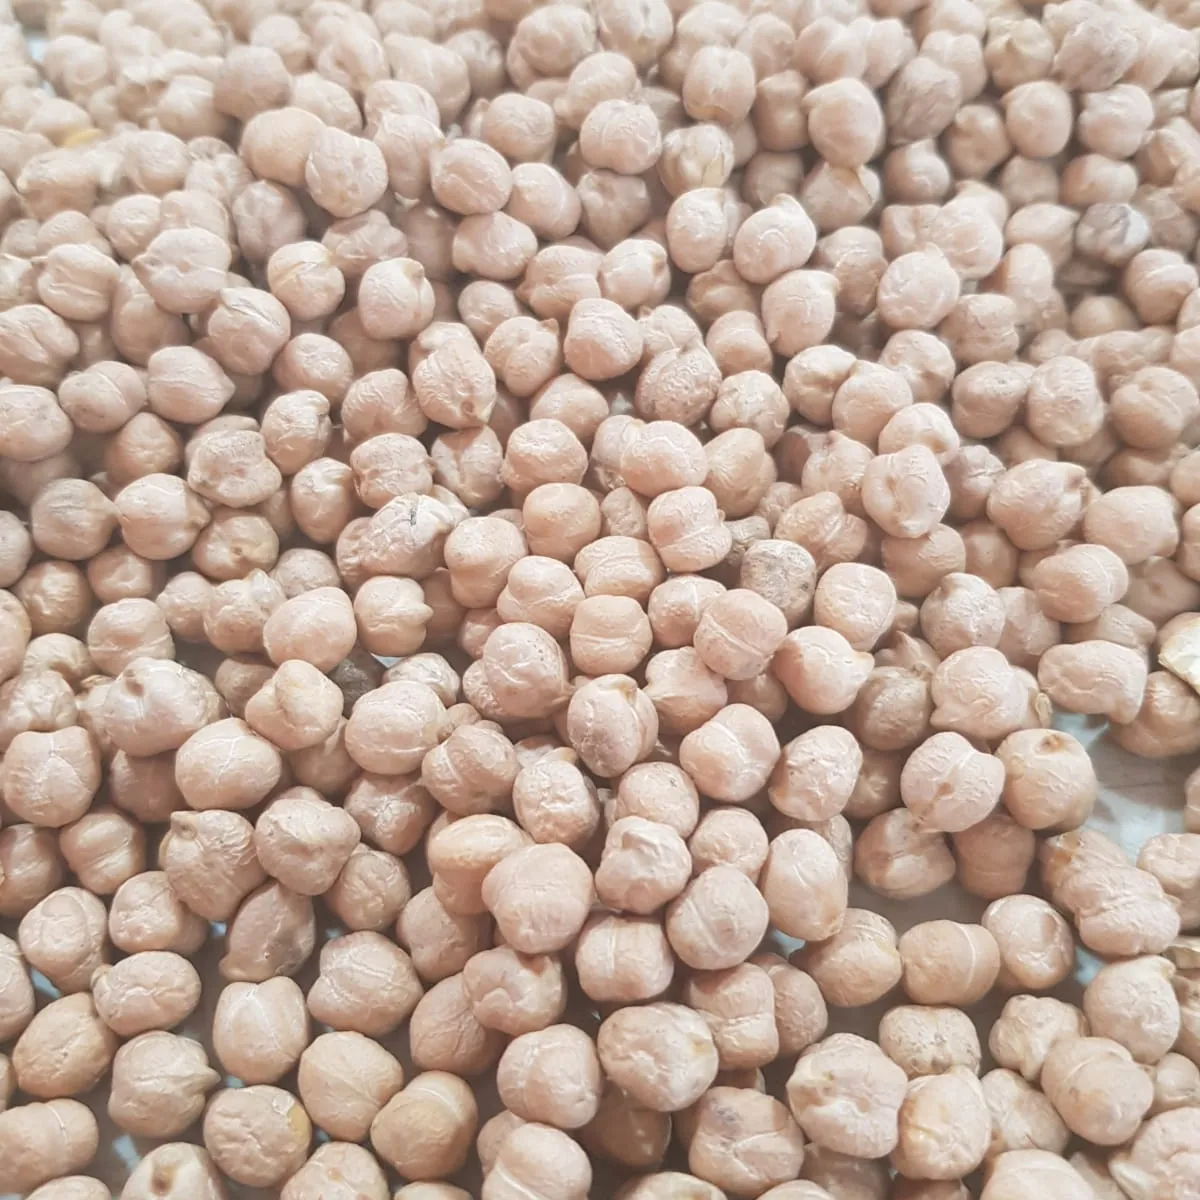 Low price premium quality Chickpeas in for sale